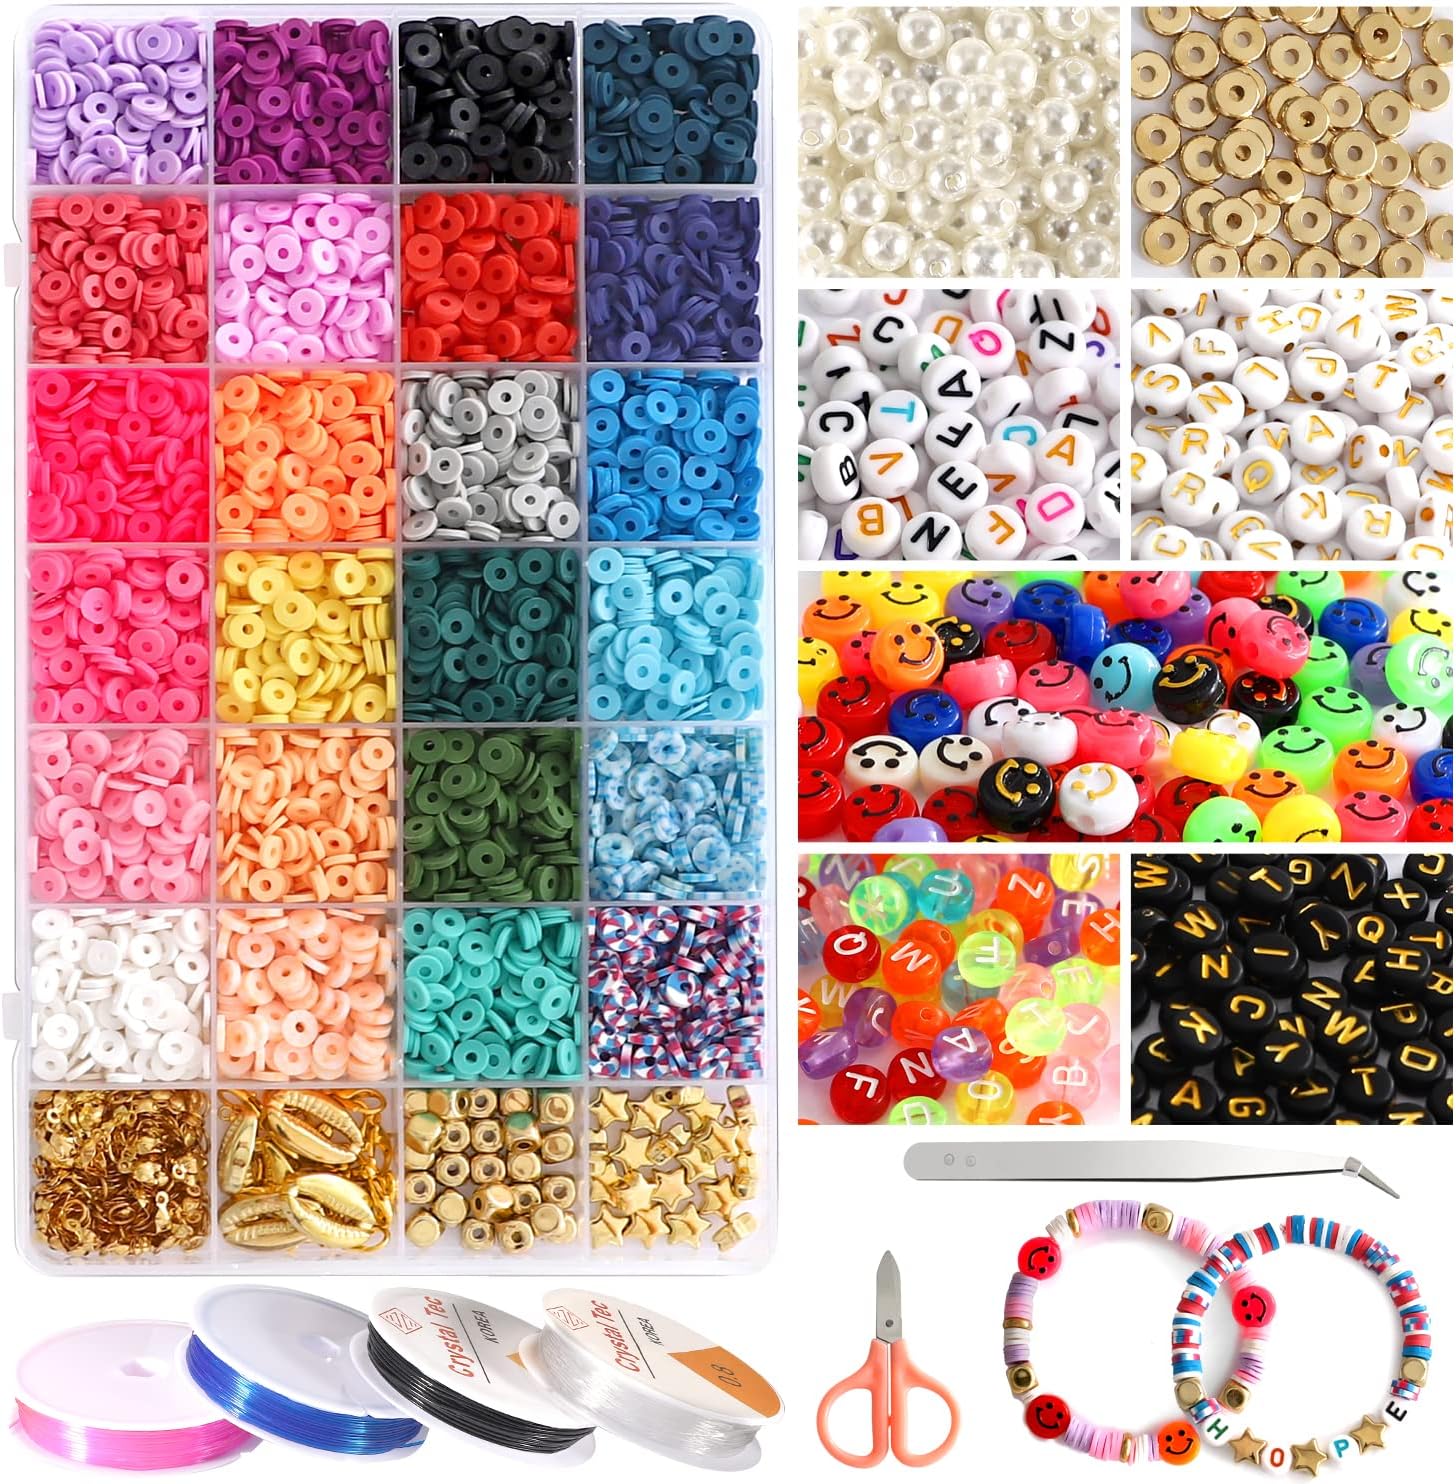 Clay Flat Beads for Jewelry Making，Round Clay Spacer Beads Heishi Clay Beads Vinyl Disc Beads for Jewelry Making Bracelet Necklace Earring DIY Making Kits for Kids Adults 4800pcs 6mm